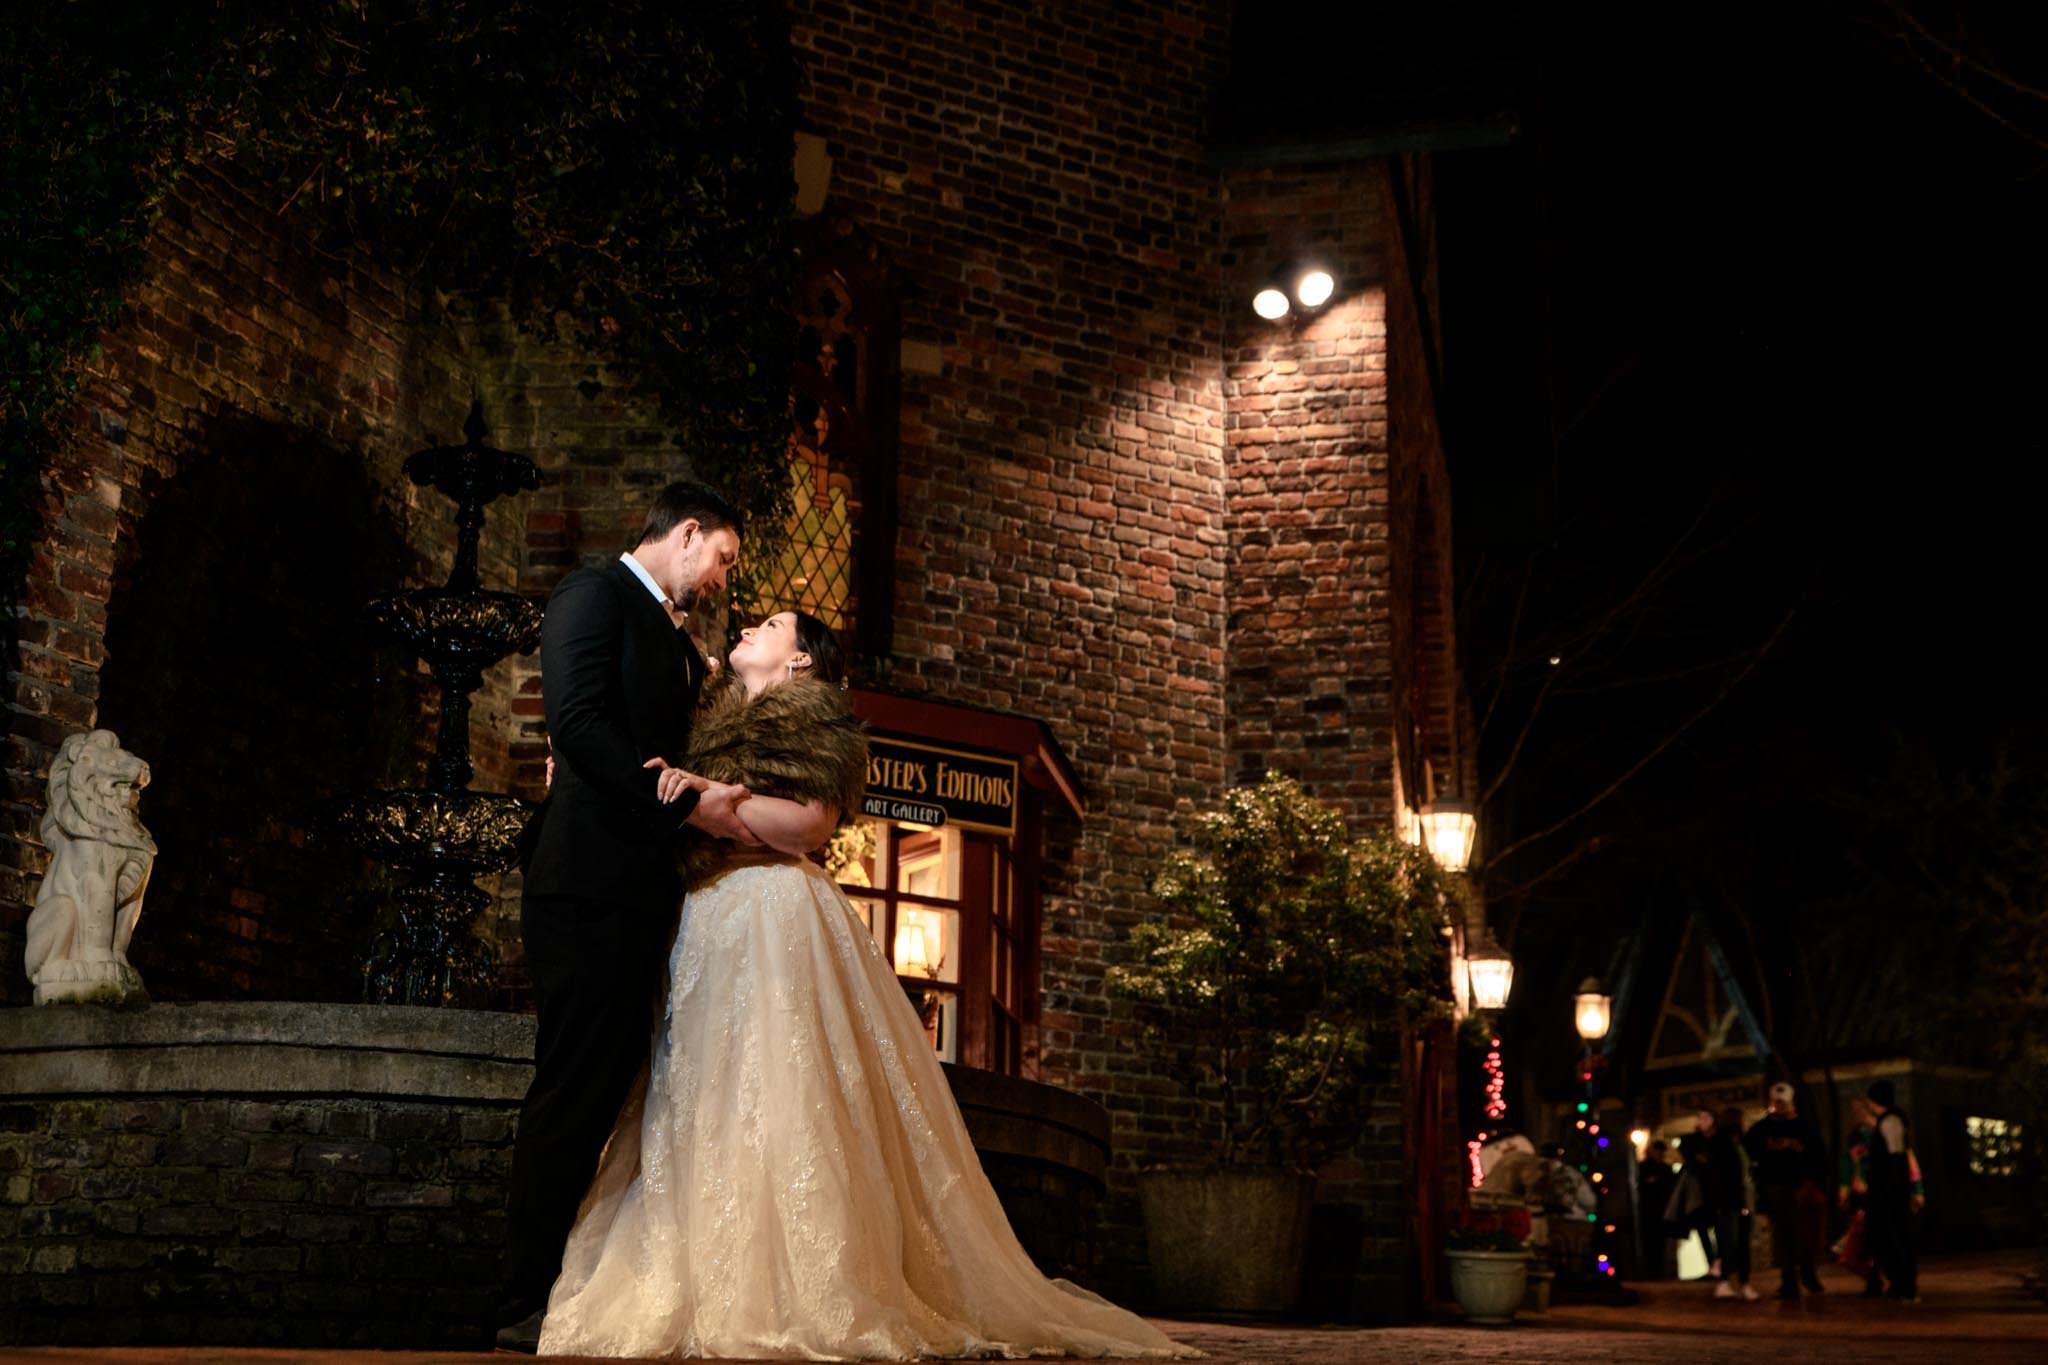 Bride and groom taking night portraits with Christmas lights in Gatlinburg Tennessee